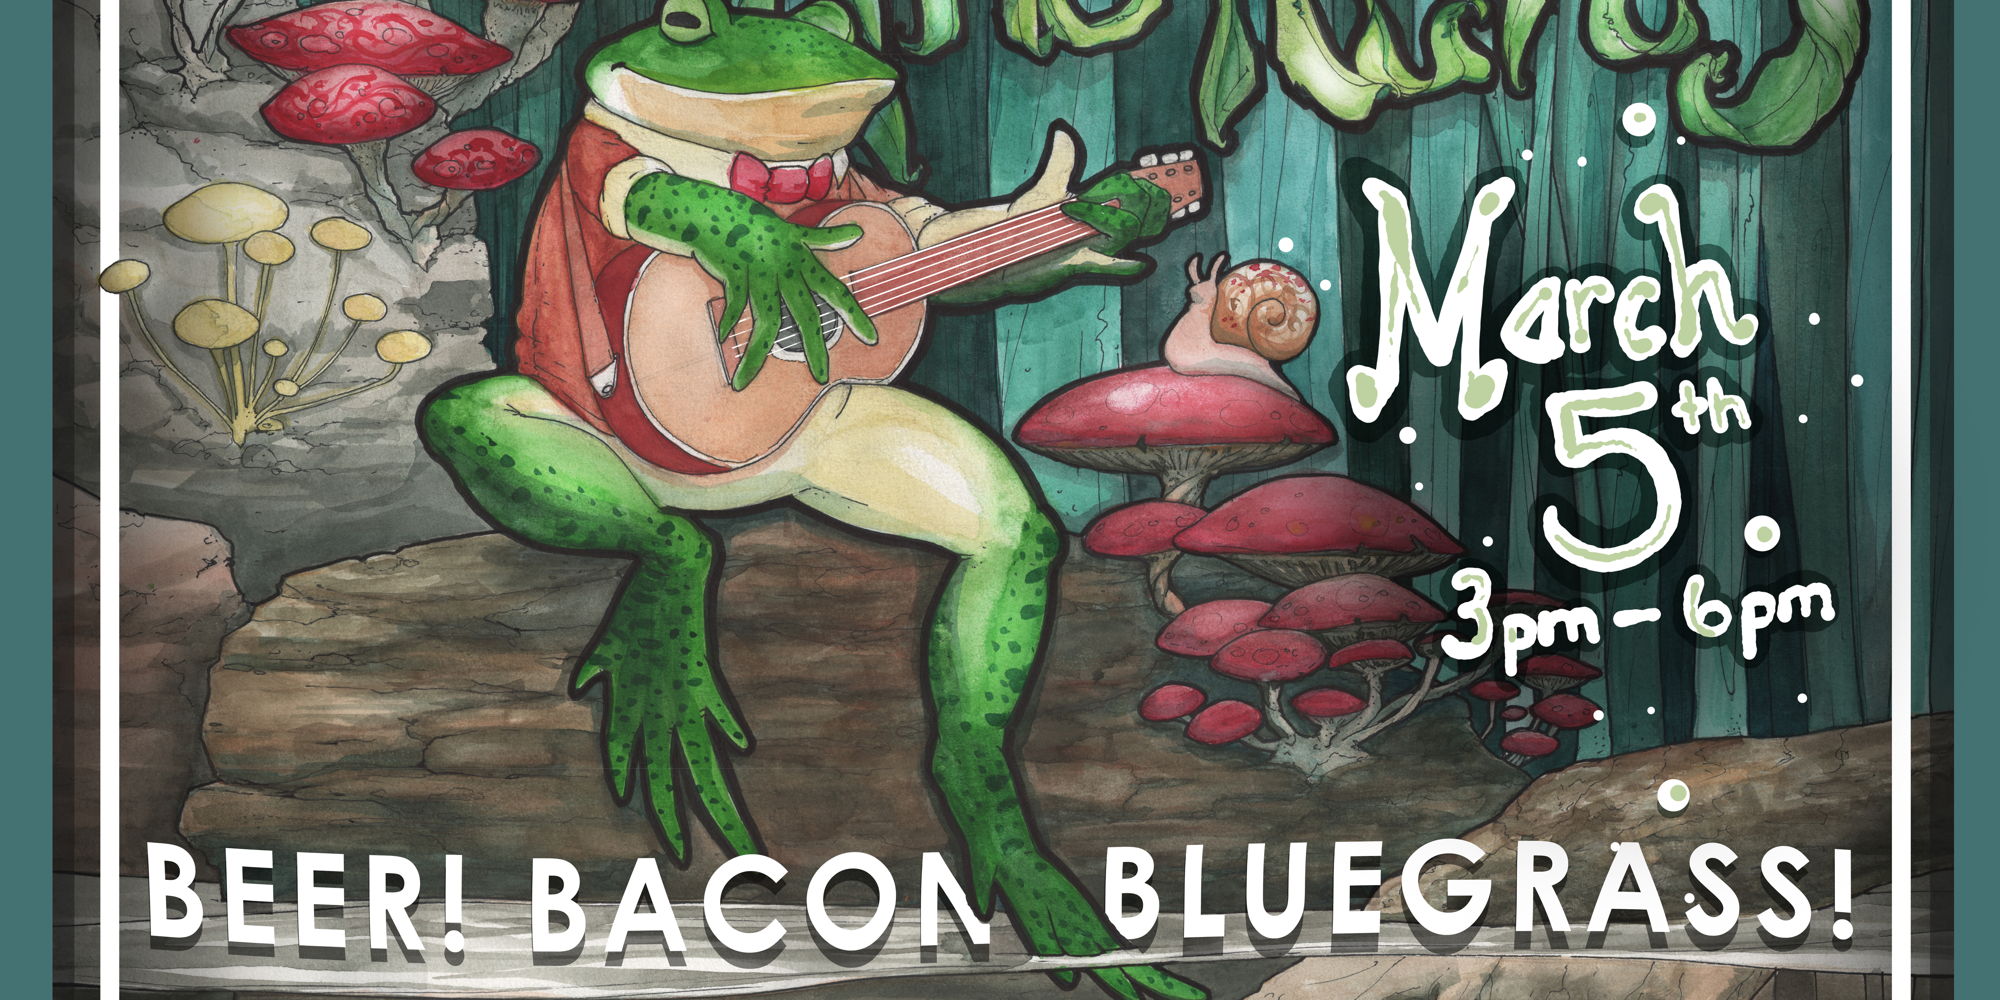 Beer Bacon and Bluegrass promotional image